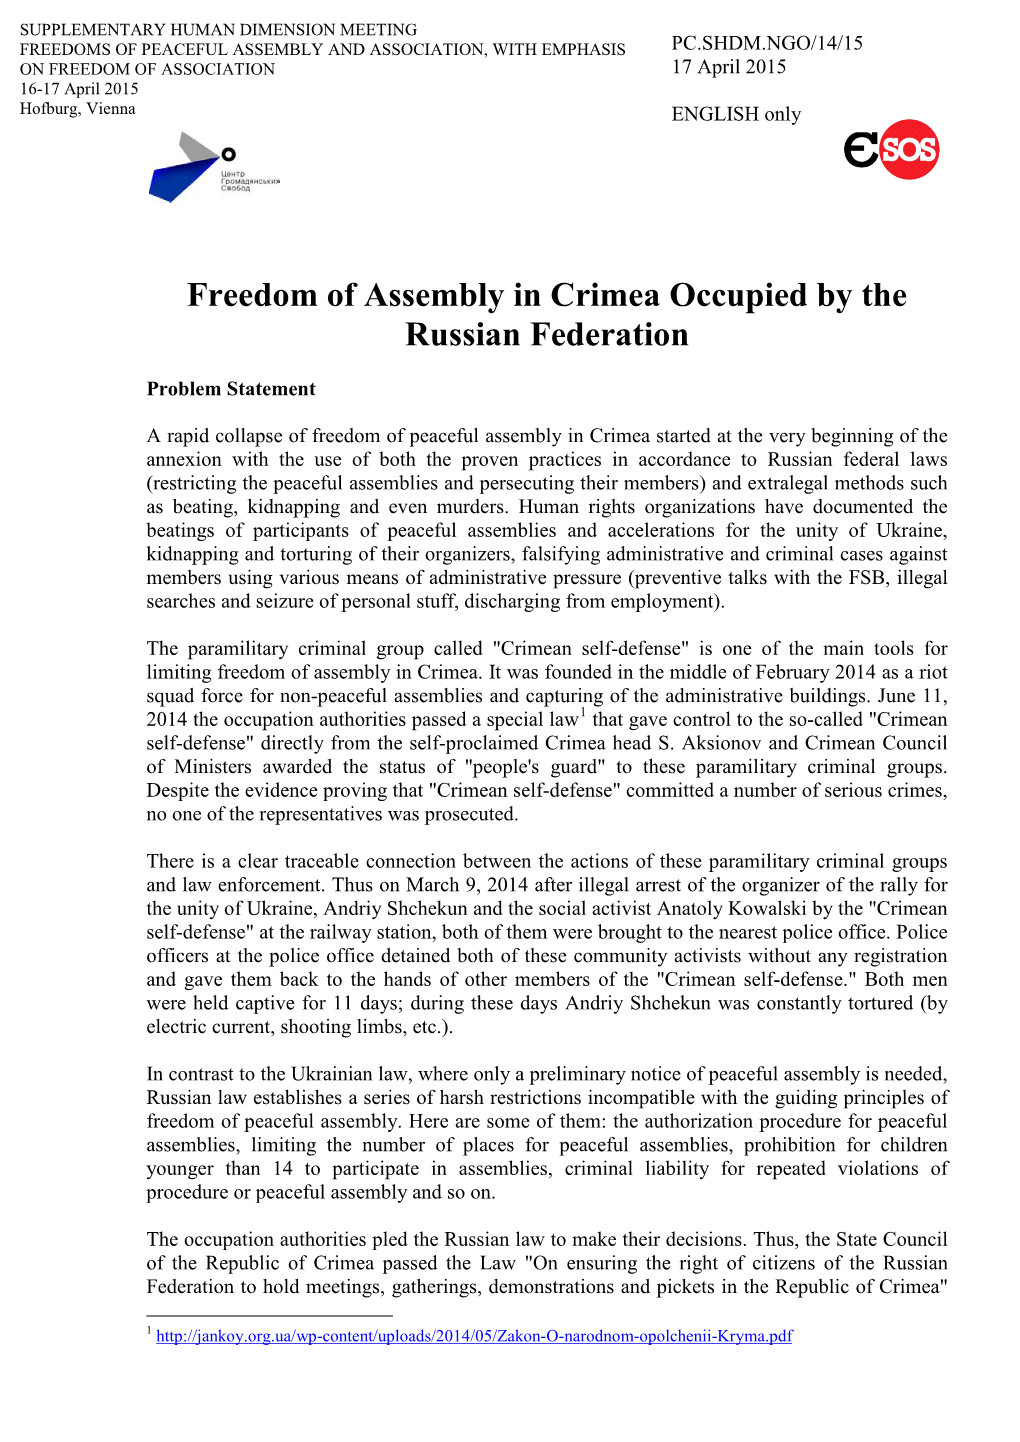 Freedom of Assembly in Crimea Occupied by the Russian Federation